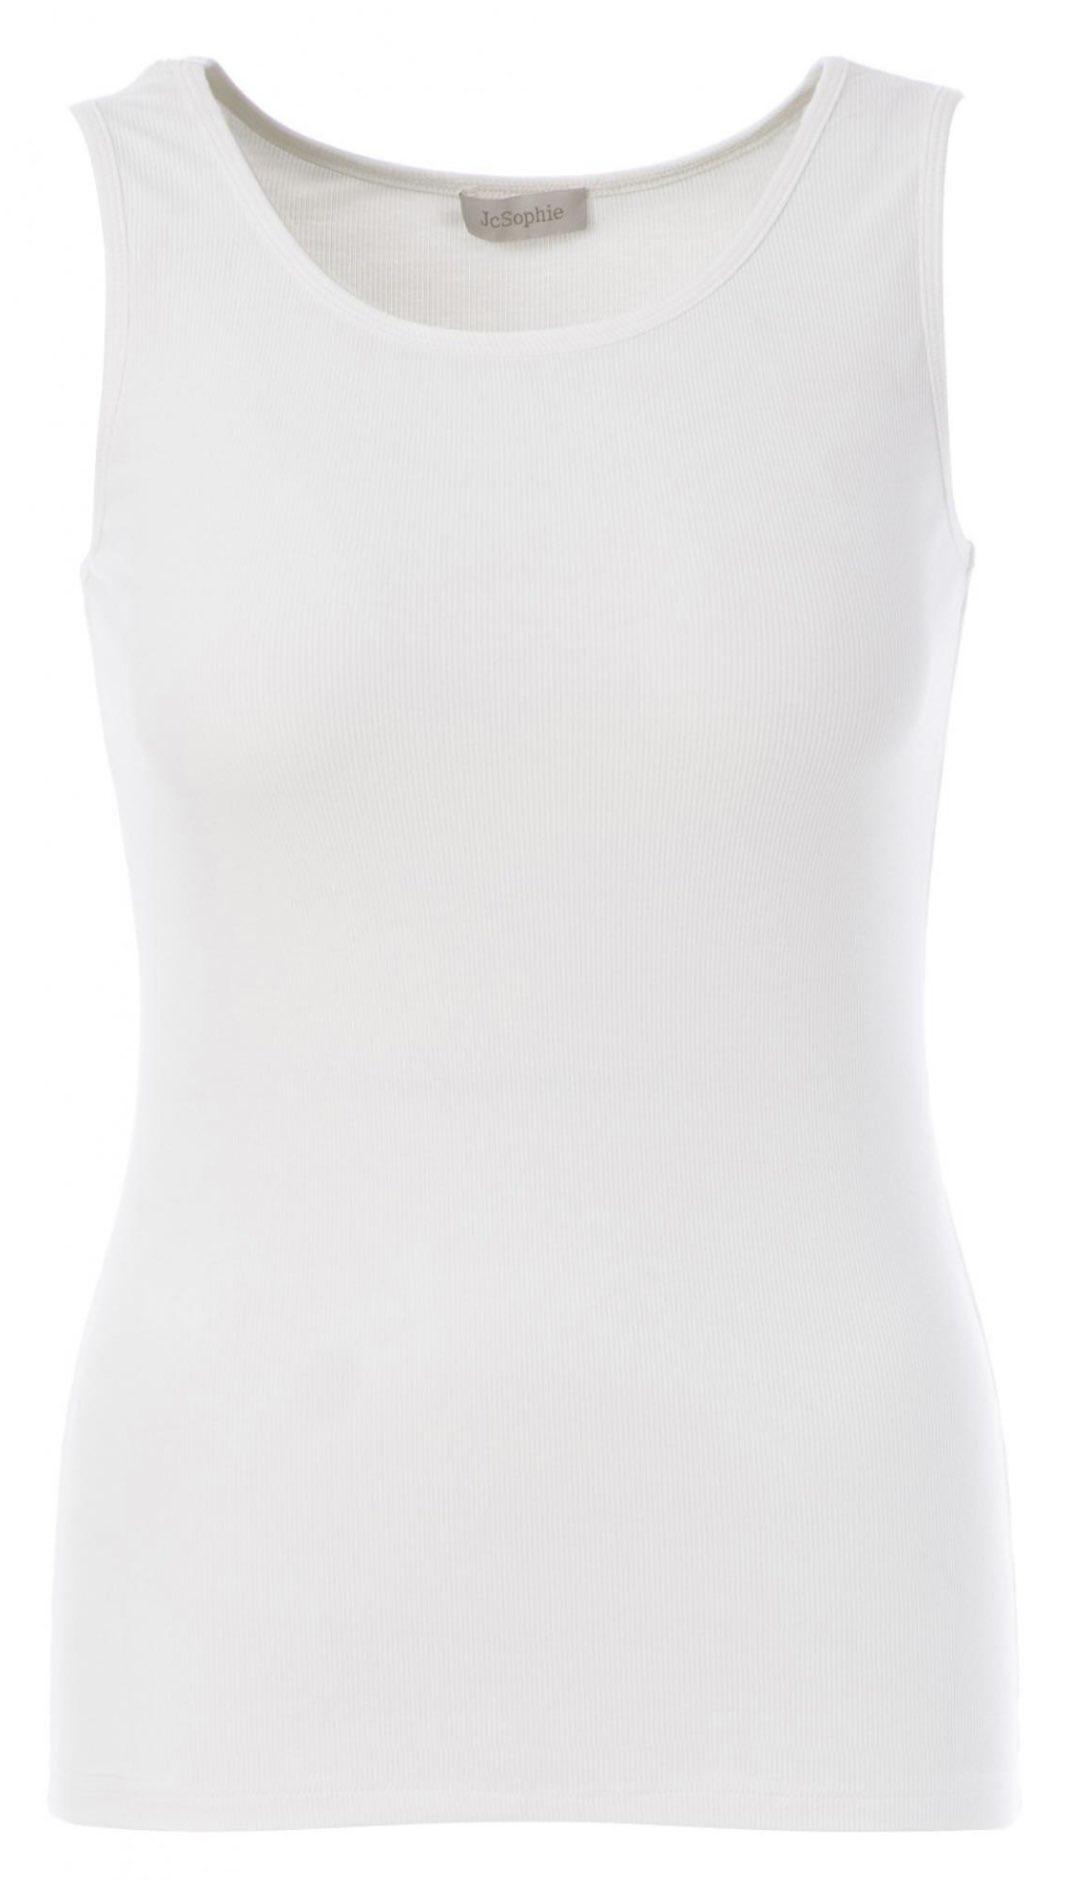 JcSophie C3026 Tanktop Cassidy Offwhite